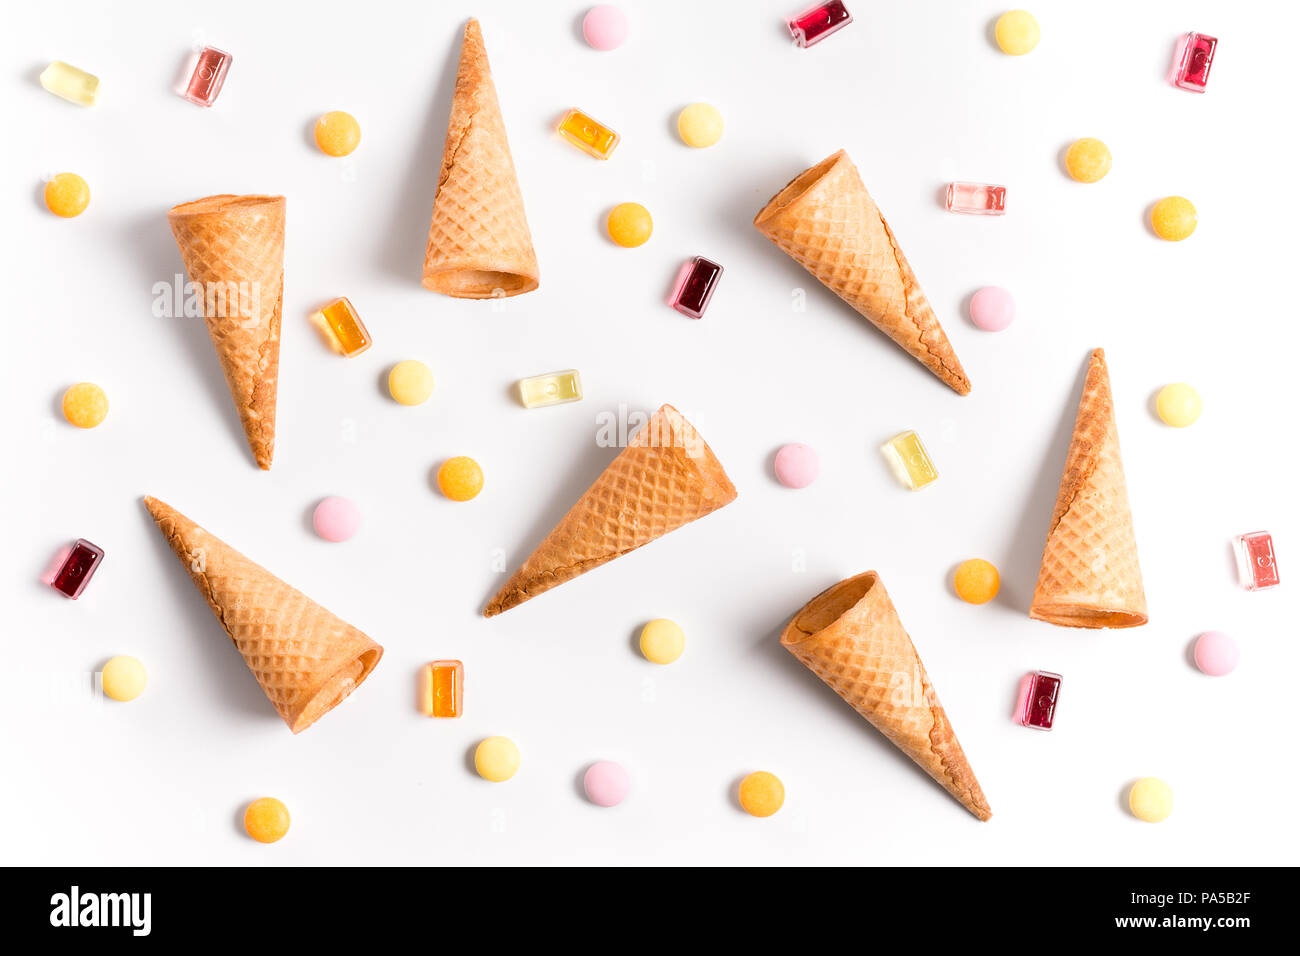 Ice crean cones and candy lay flat image wallpaper Stock Photo